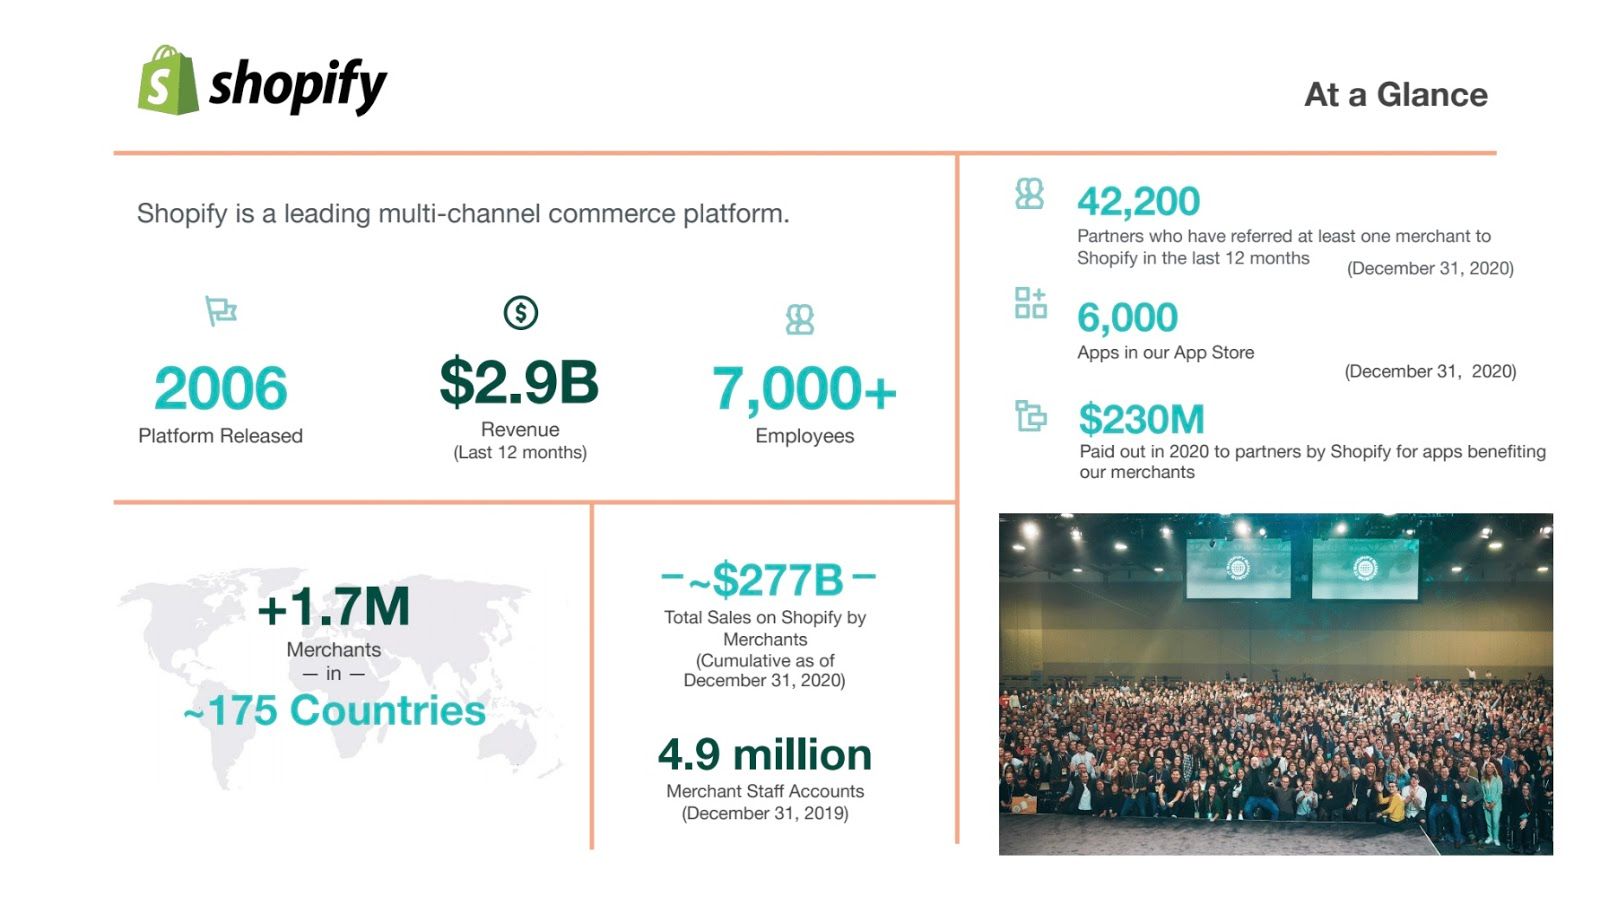 Shopify at a glance